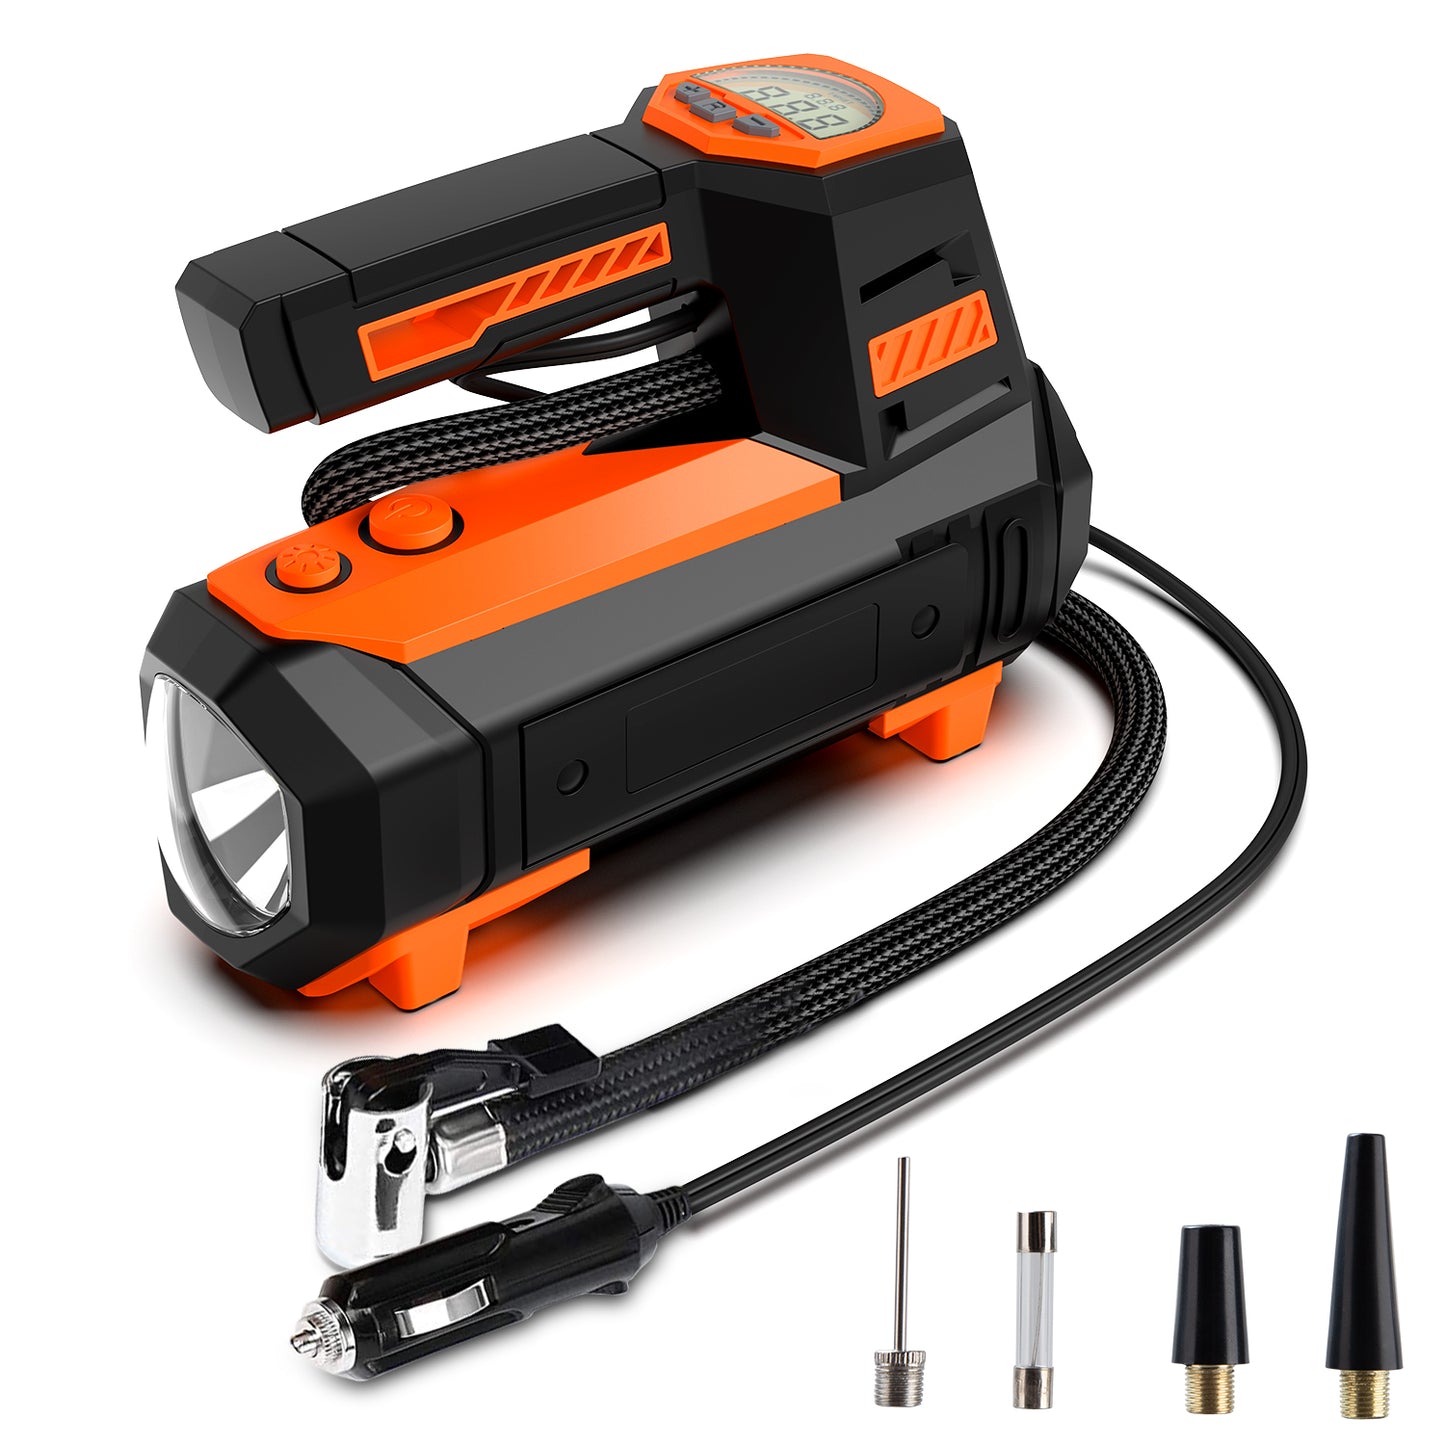 Portable Tire Inflator 12V, Portable DC Air Compressor for Car Tires, Mini Car Air Compressors Tool with LED Light, Digital Air Pump for Car Tires, Bicycles and Other Inflatables, Orange